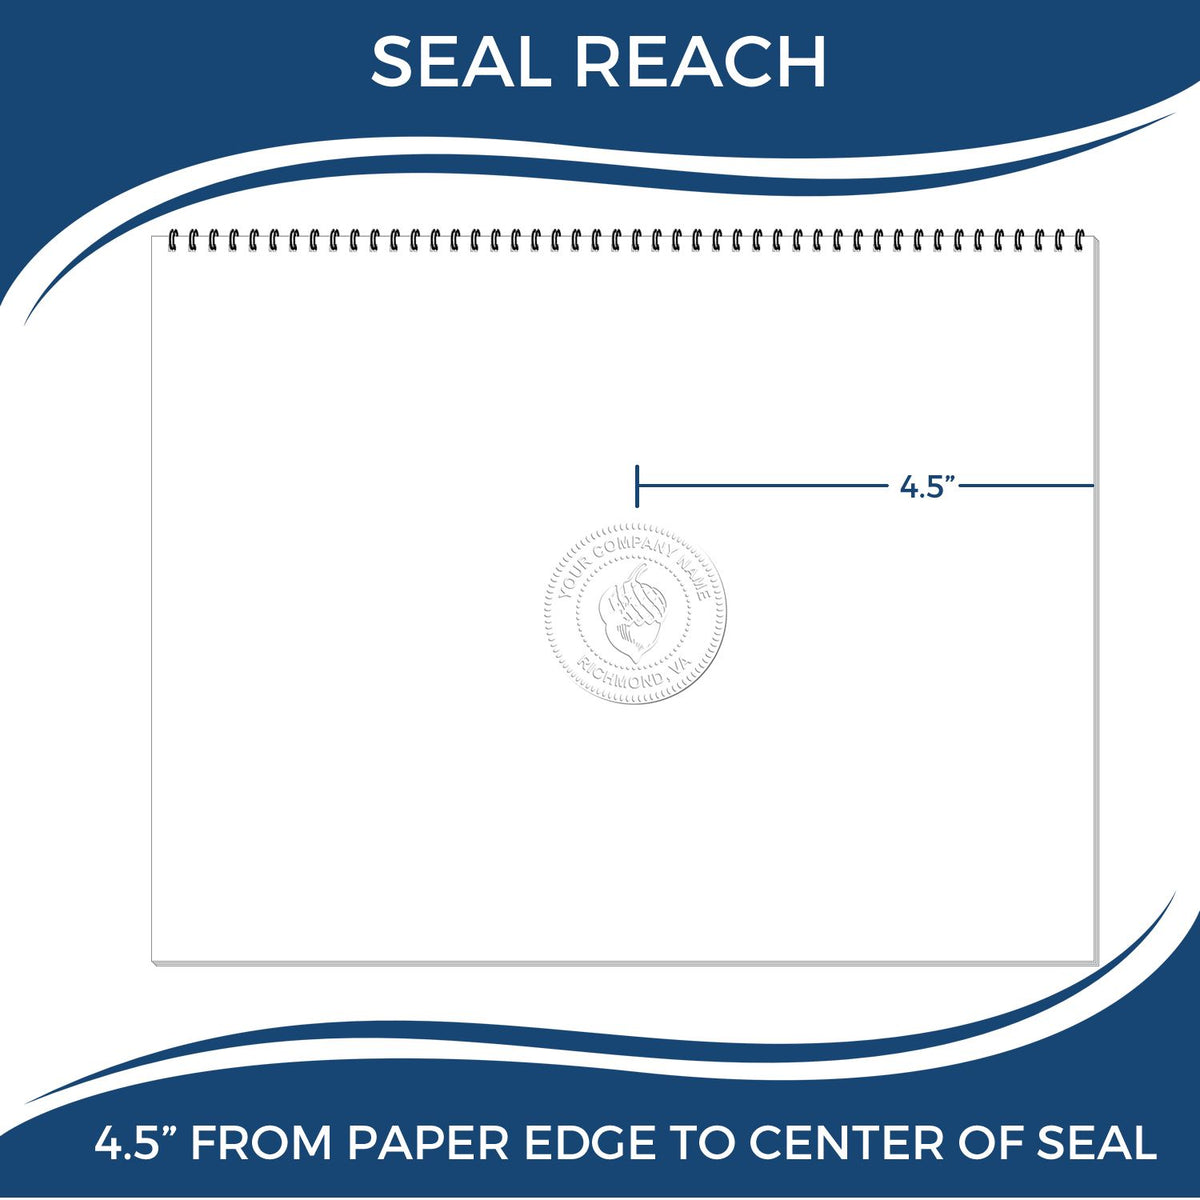 An infographic showing the seal reach which is represented by a ruler and a miniature seal image of the Extended Long Reach Kentucky Surveyor Embosser